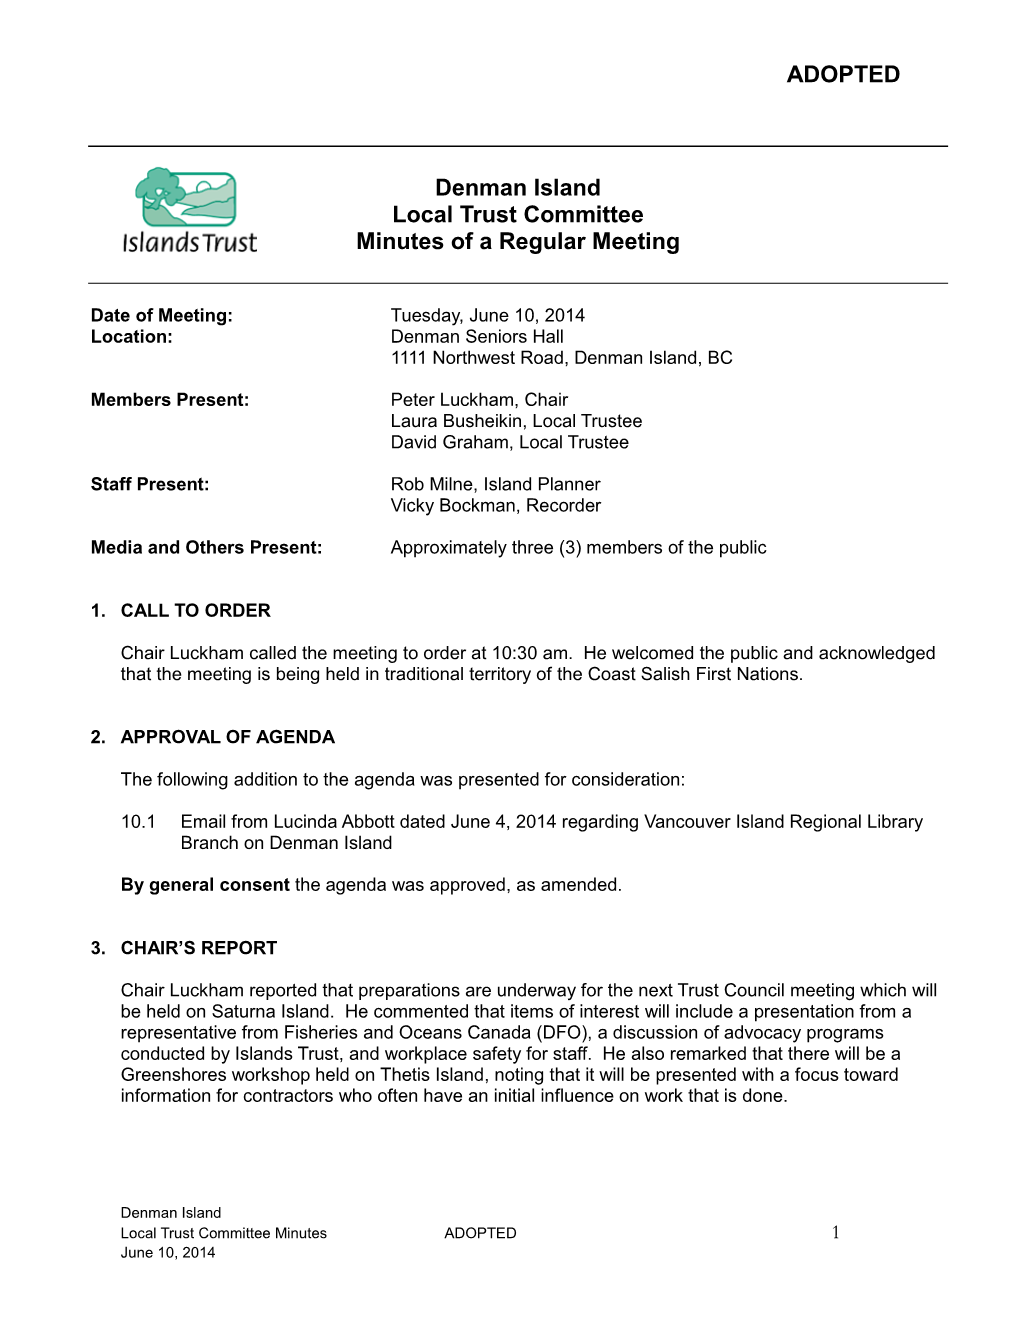 Minutes of the Hornby Island Local Trust Committee